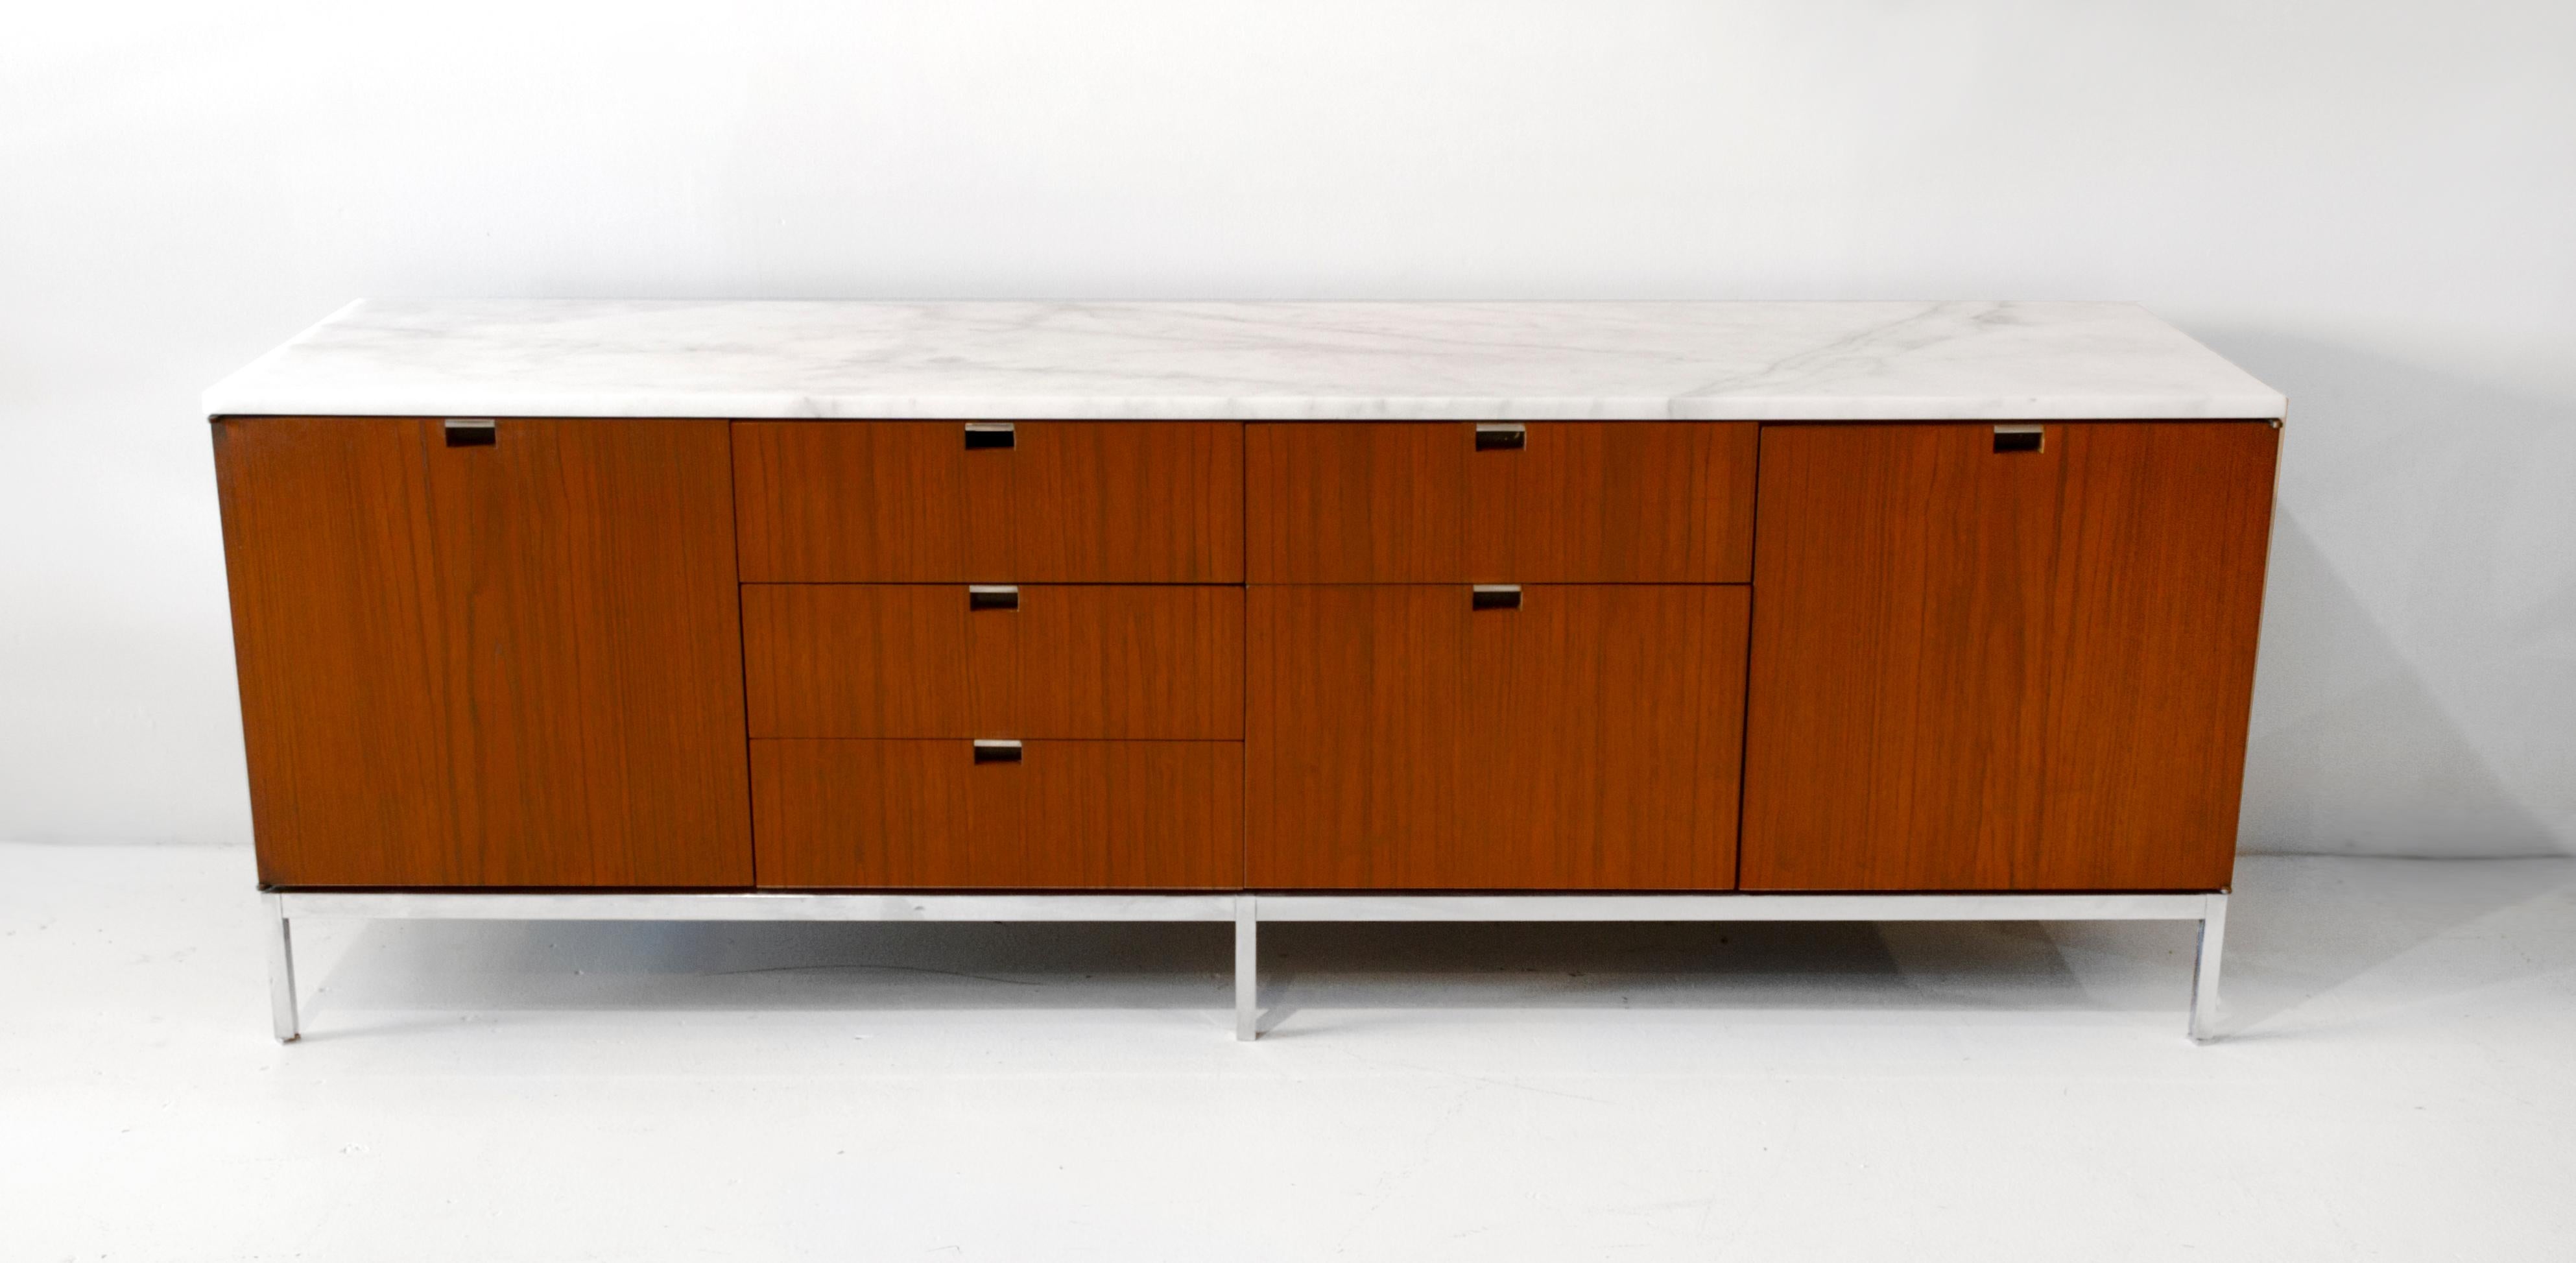 Beautiful credenza designed by Florence Knoll for Knoll International. Constructed with teak wood, marble top and oak interior, the left door opens to reveal a pull-out shelf, right door conceals adjustable shelf. The credenza is in very good